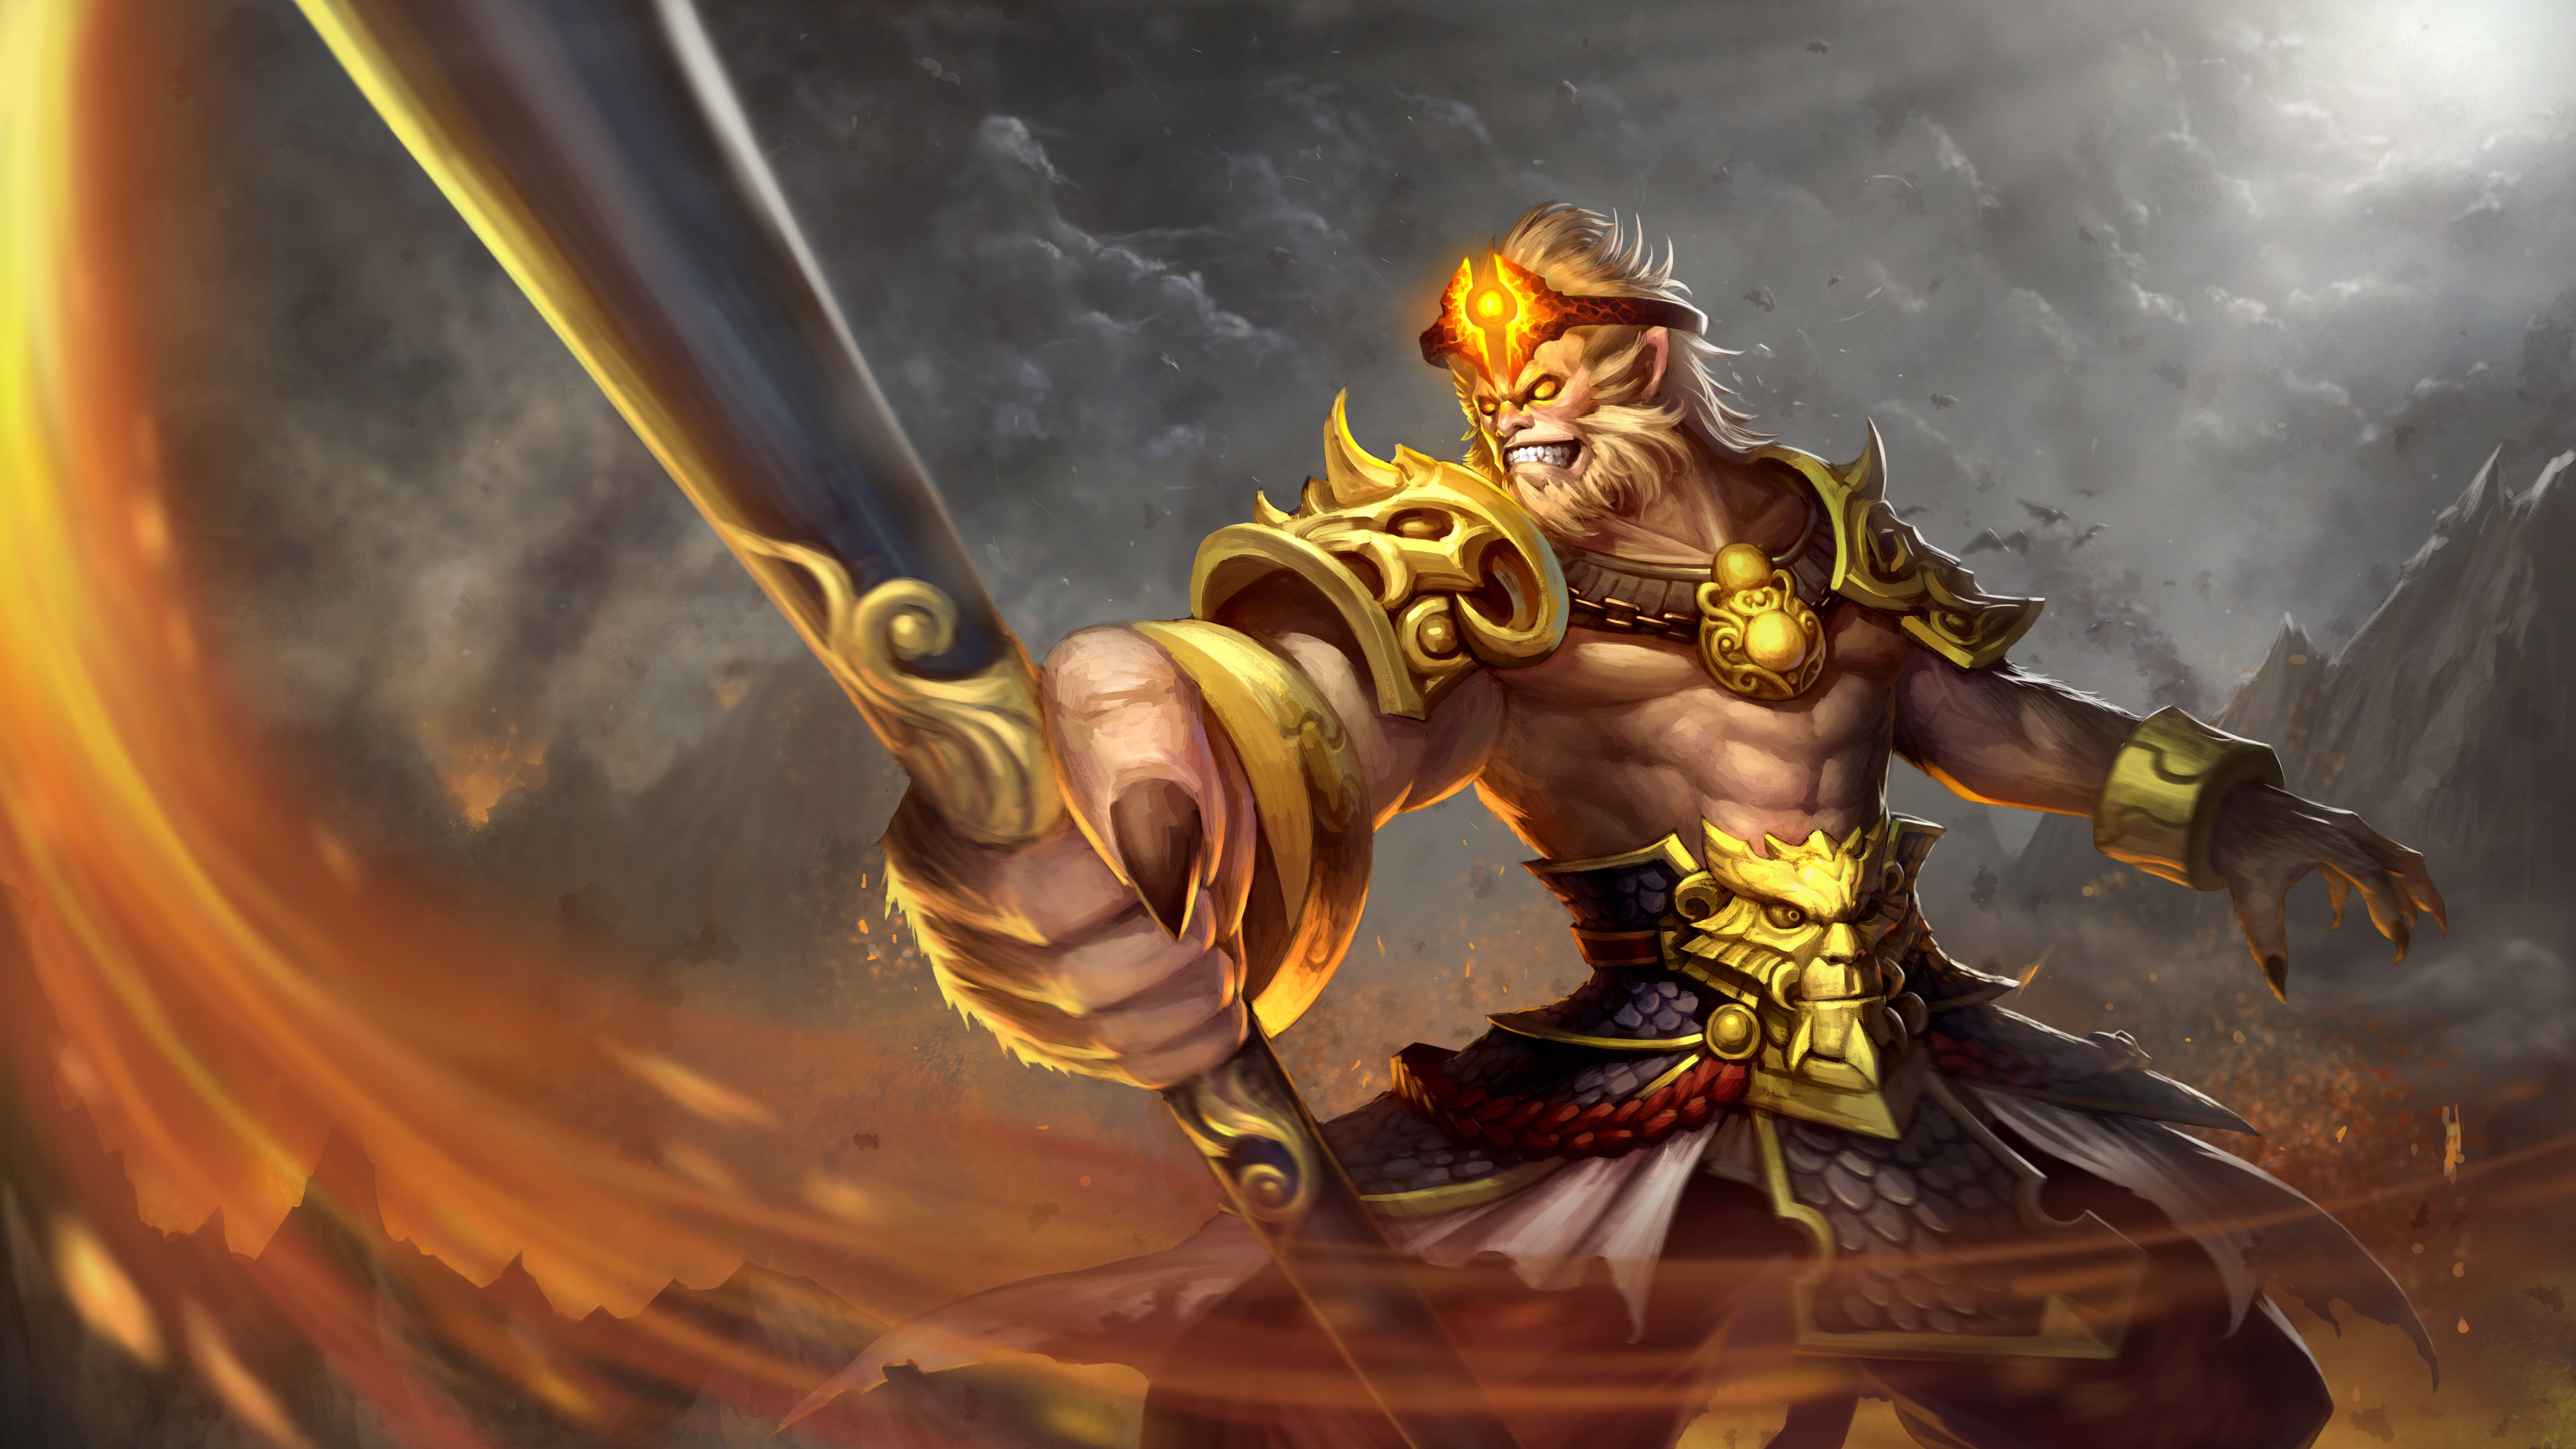 Wukong The Monkey King Wallpaper Download  MobCup